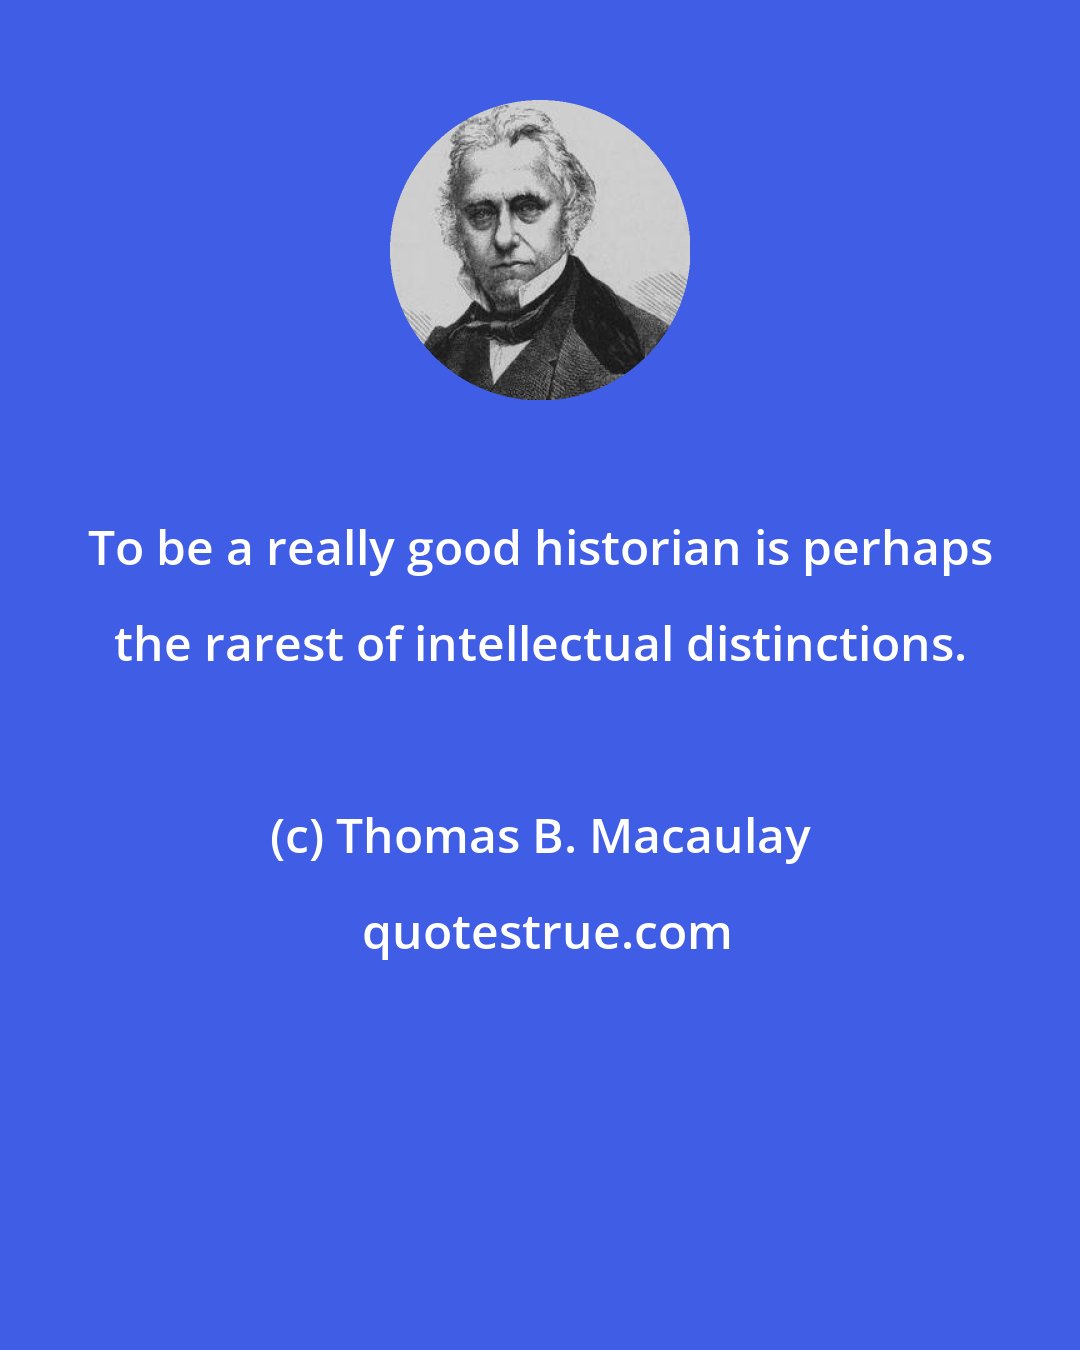 Thomas B. Macaulay: To be a really good historian is perhaps the rarest of intellectual distinctions.